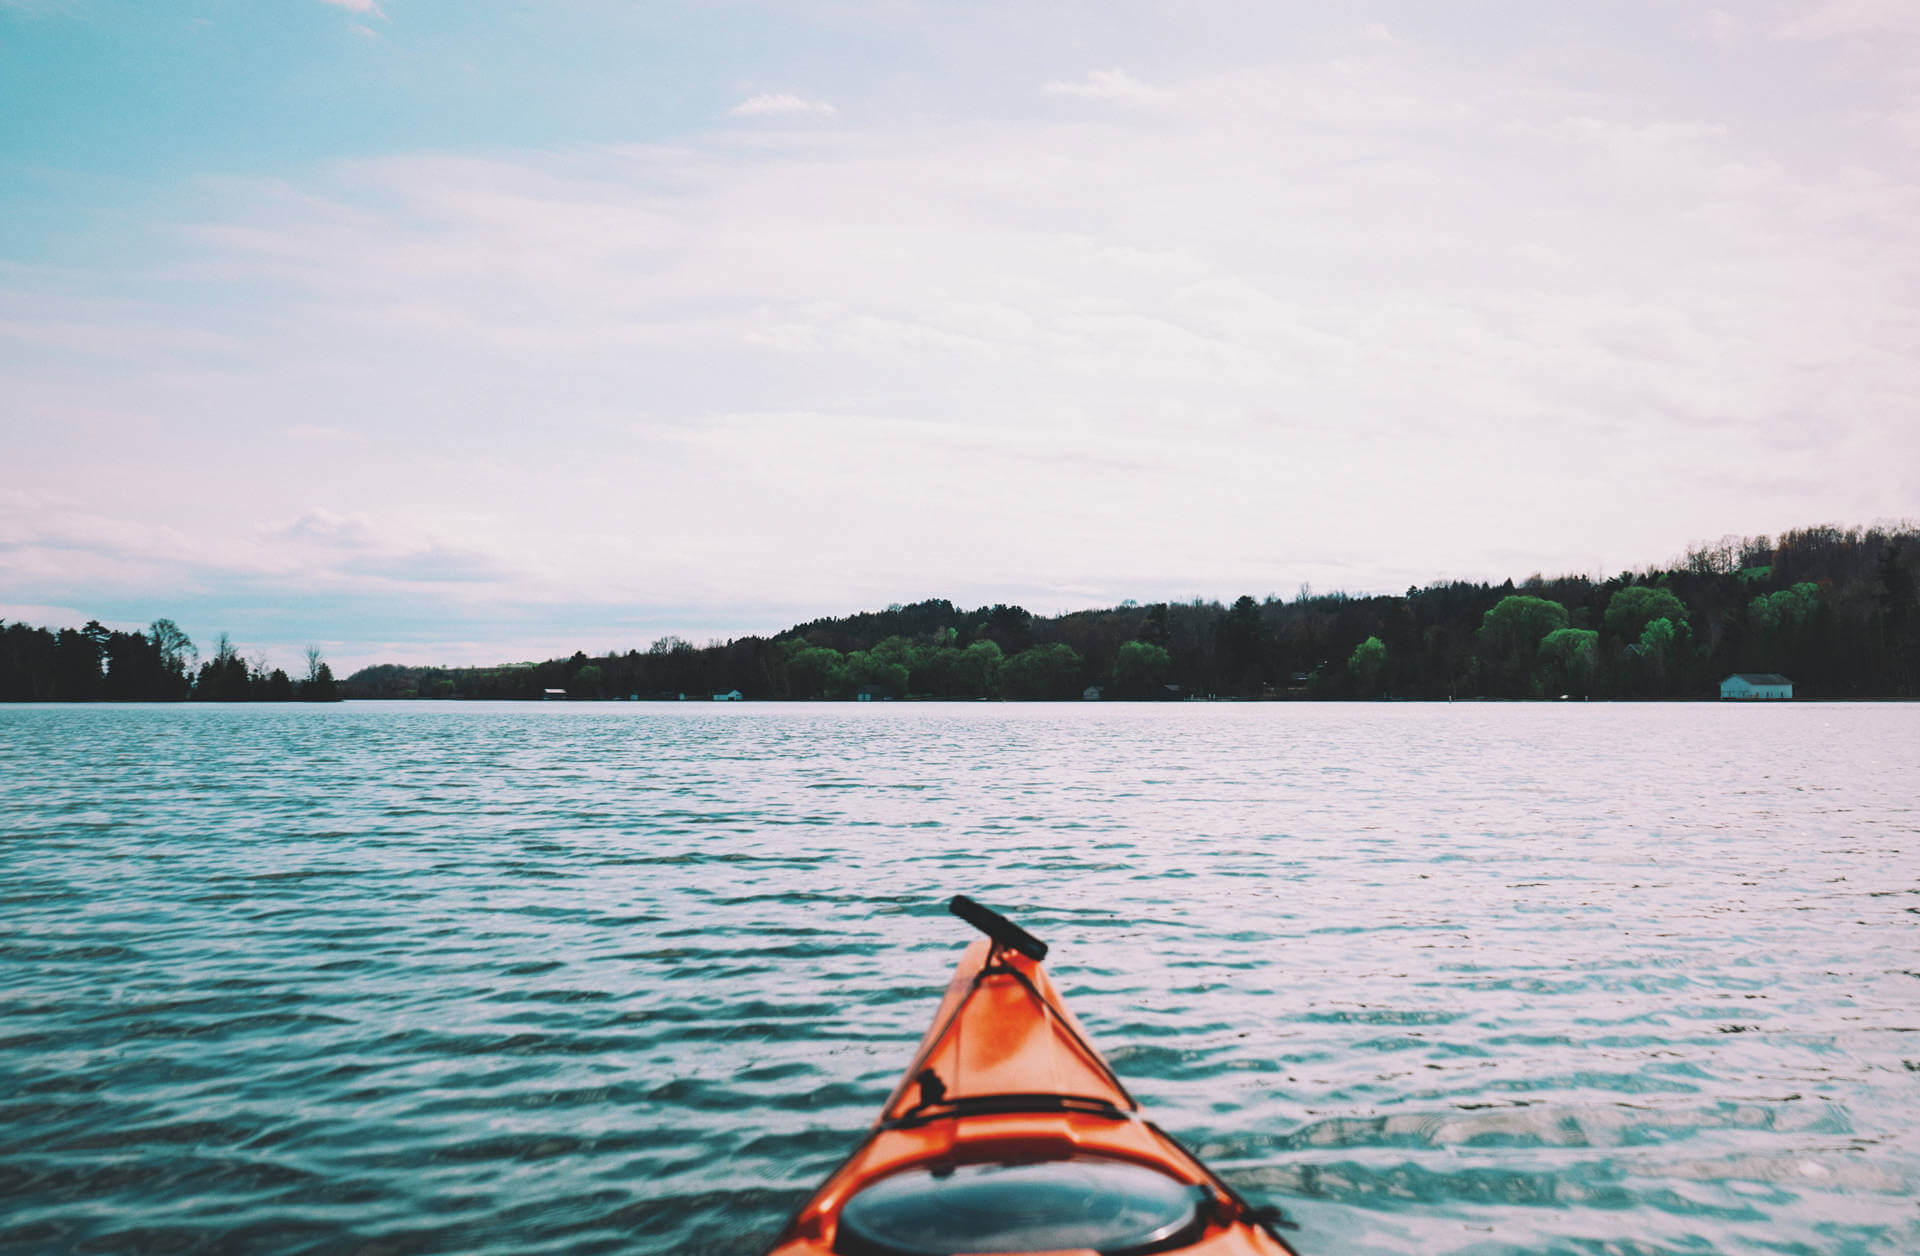 What Do You Need to Get if You Want to Take Up Kayaking?